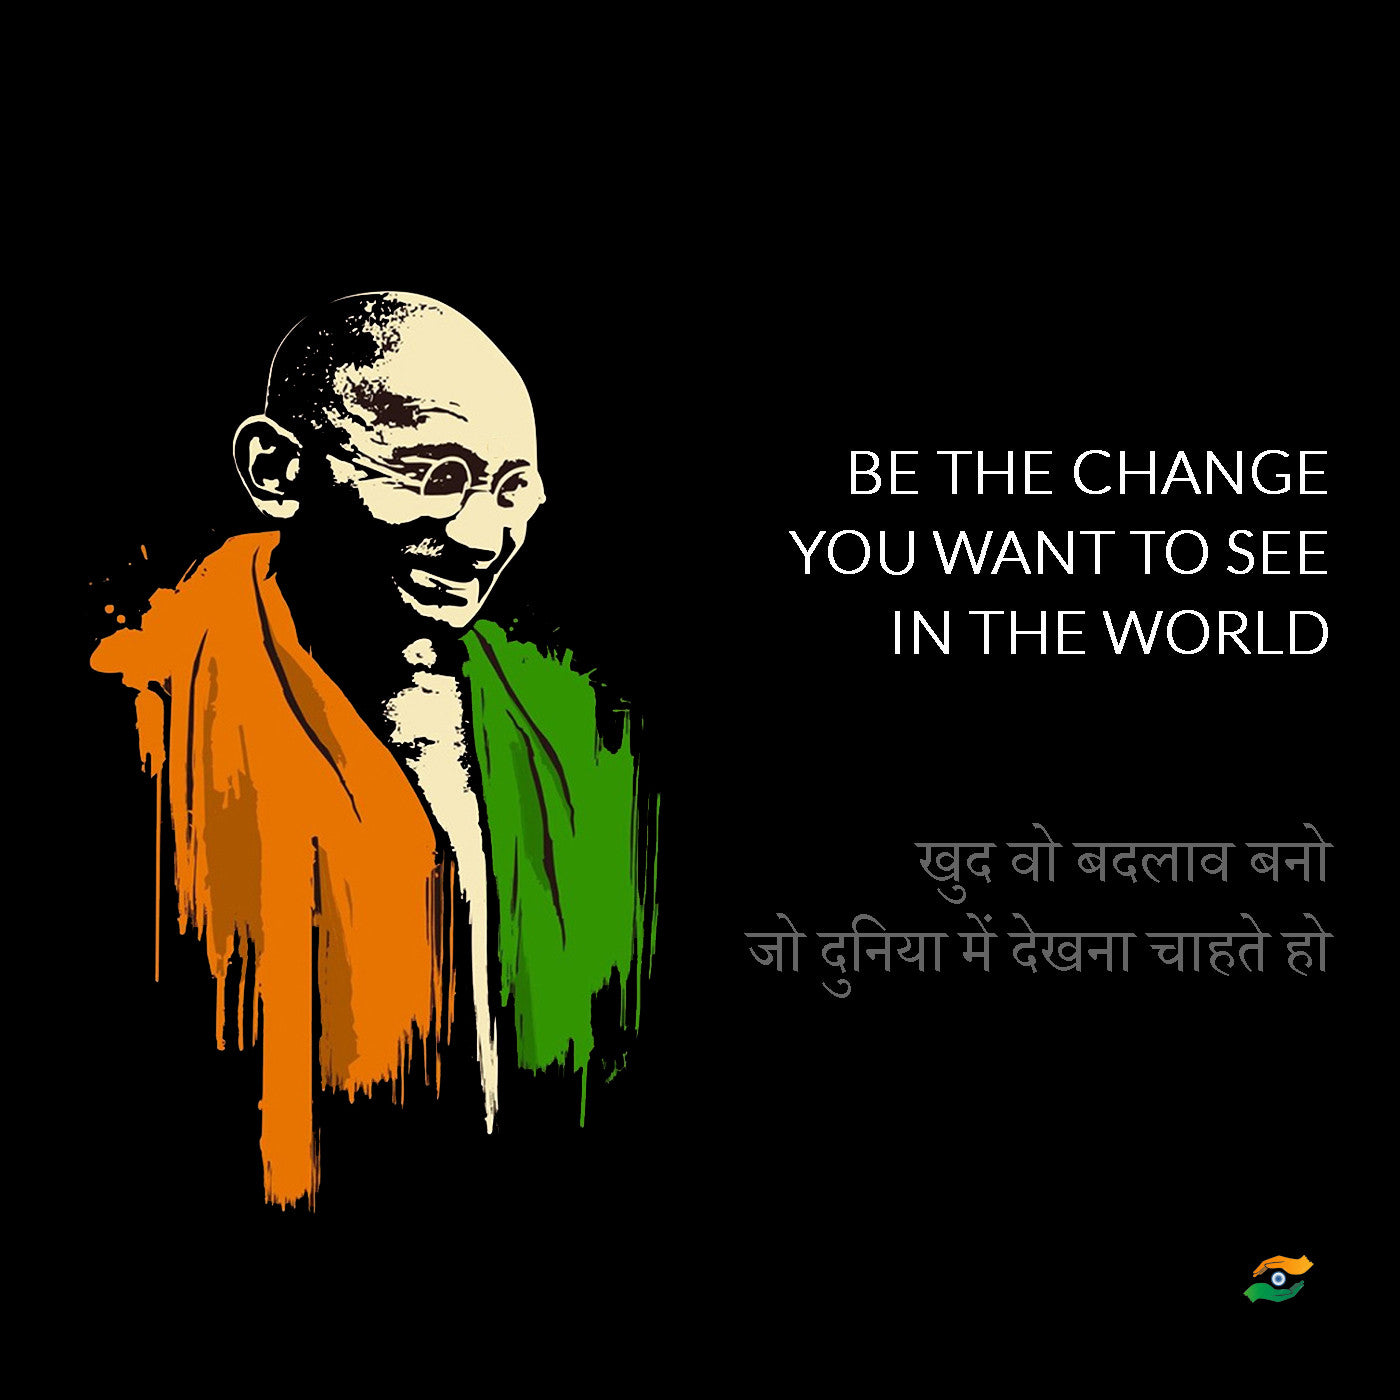 Set of 3 Mahatma Gandhi Quotes In Hindi With Black Background by Sina Irani  | Buy Posters, Frames, Canvas & Digital Art Prints | Small, Compact, Medium  , Large and Big Oversized Variants